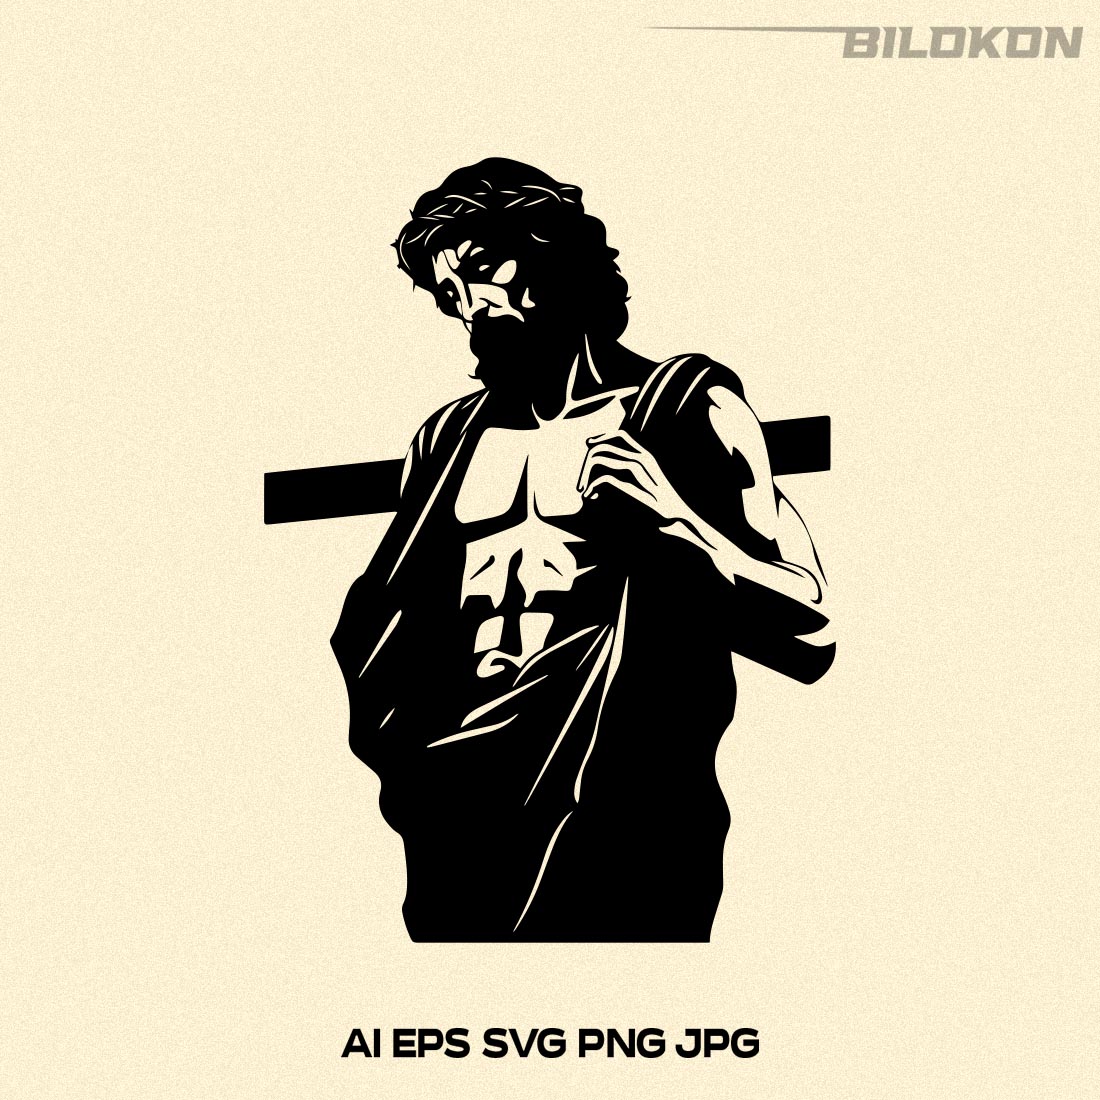 Jesus on the cross, prays to God, SVG Vector cover image.